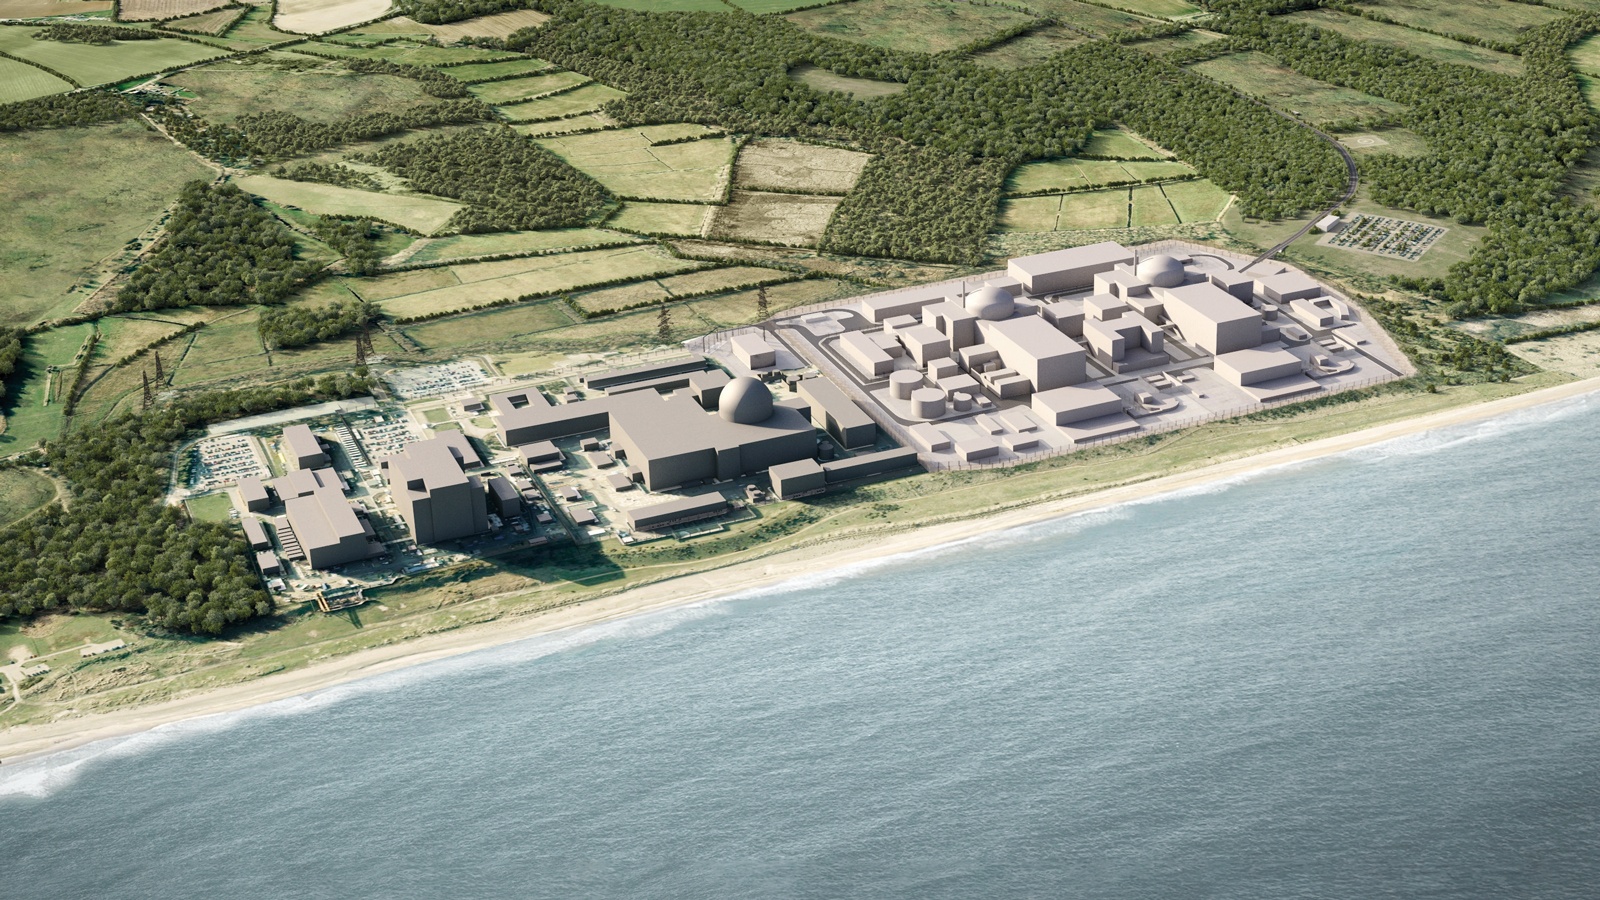 Framatome selected to replicate Hinkley Point C’s reactor technology for Sizewell C